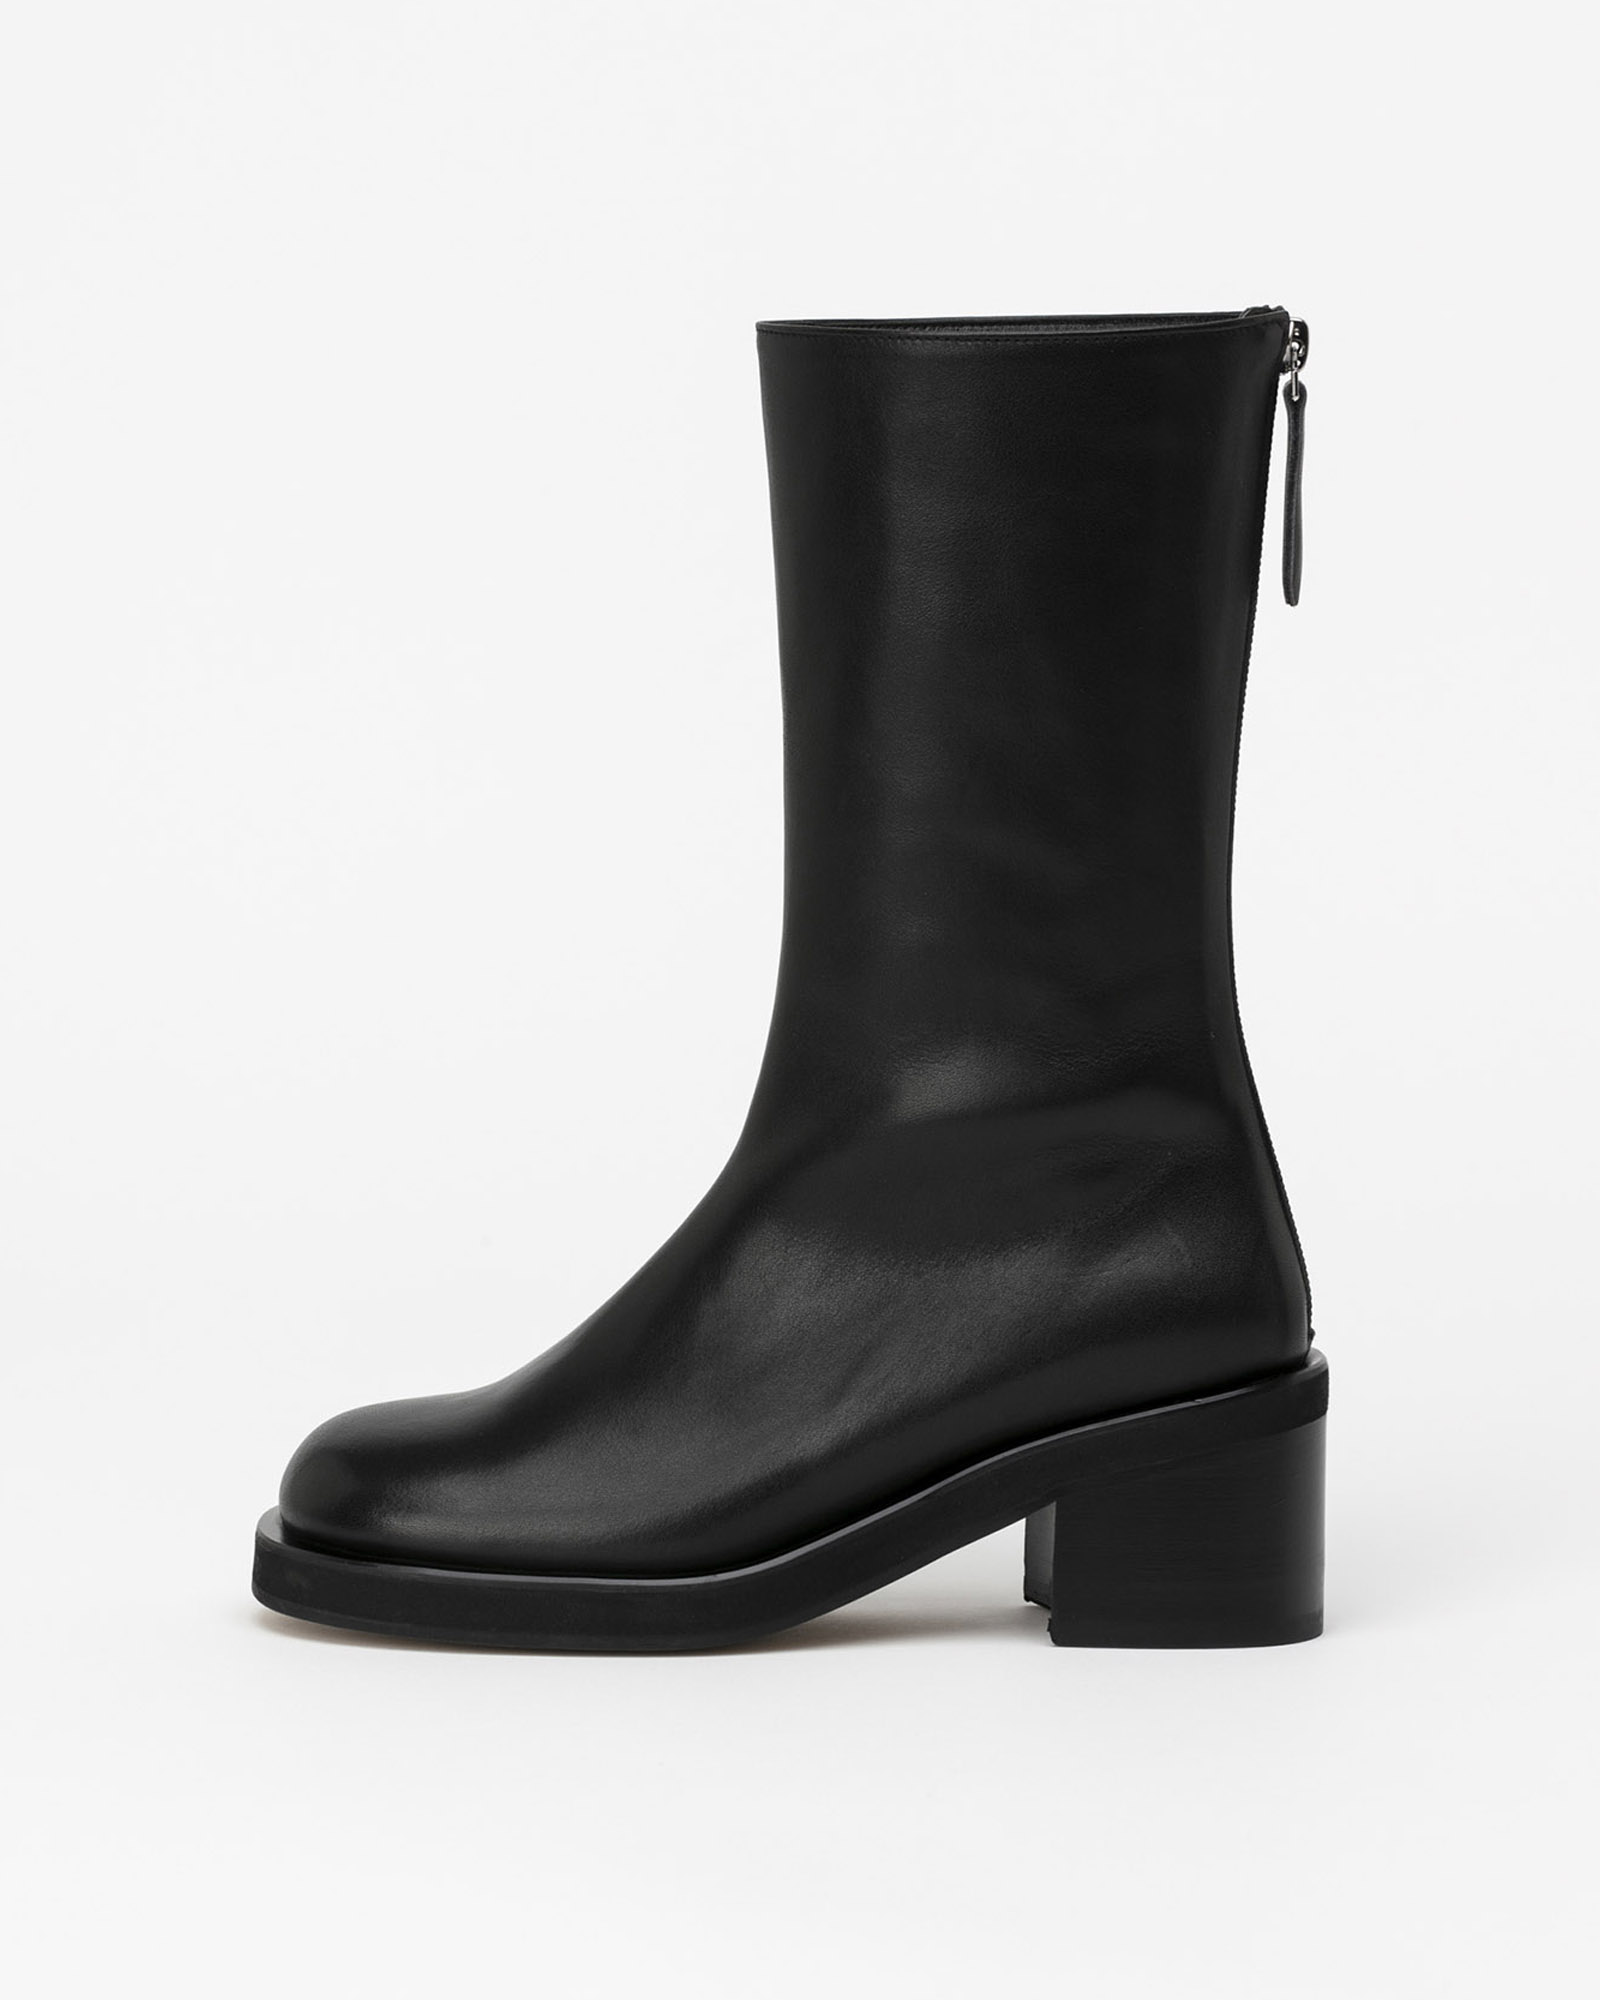 Orca Half Long Boots in Black